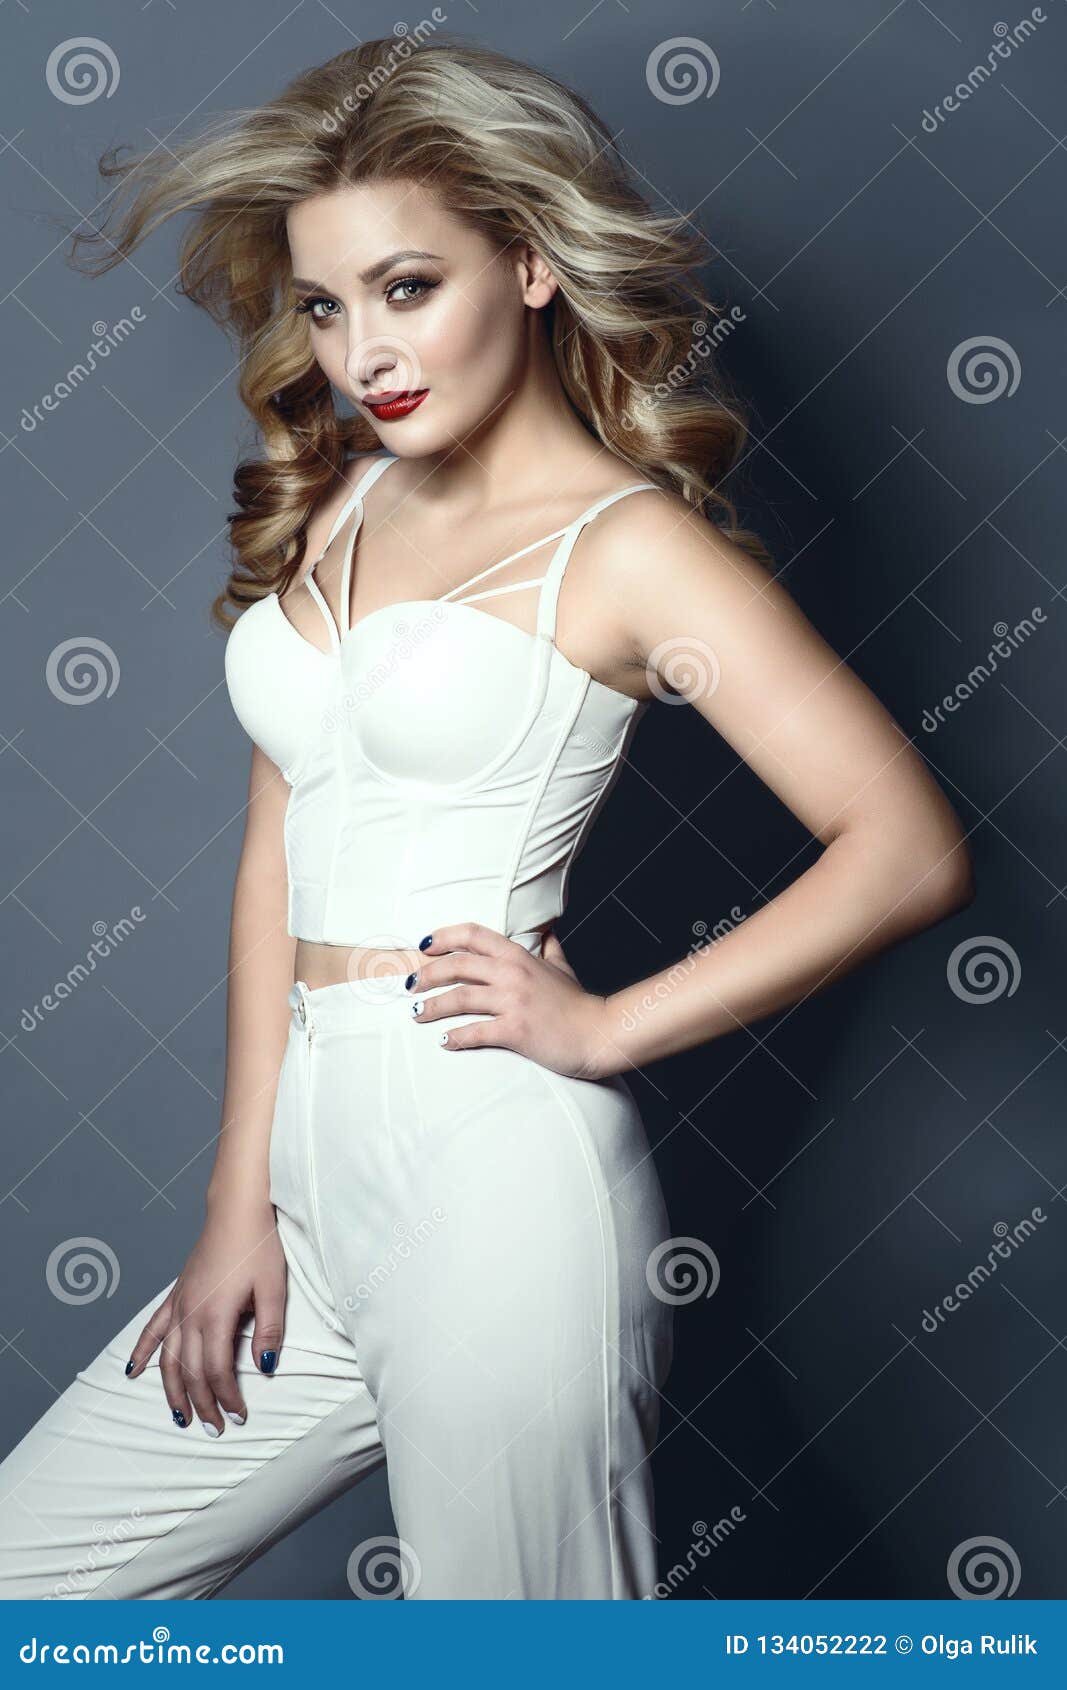 beautiful blond model with perfect make up and wavy hairstyle wearing white high waisted pants and corset strapped top